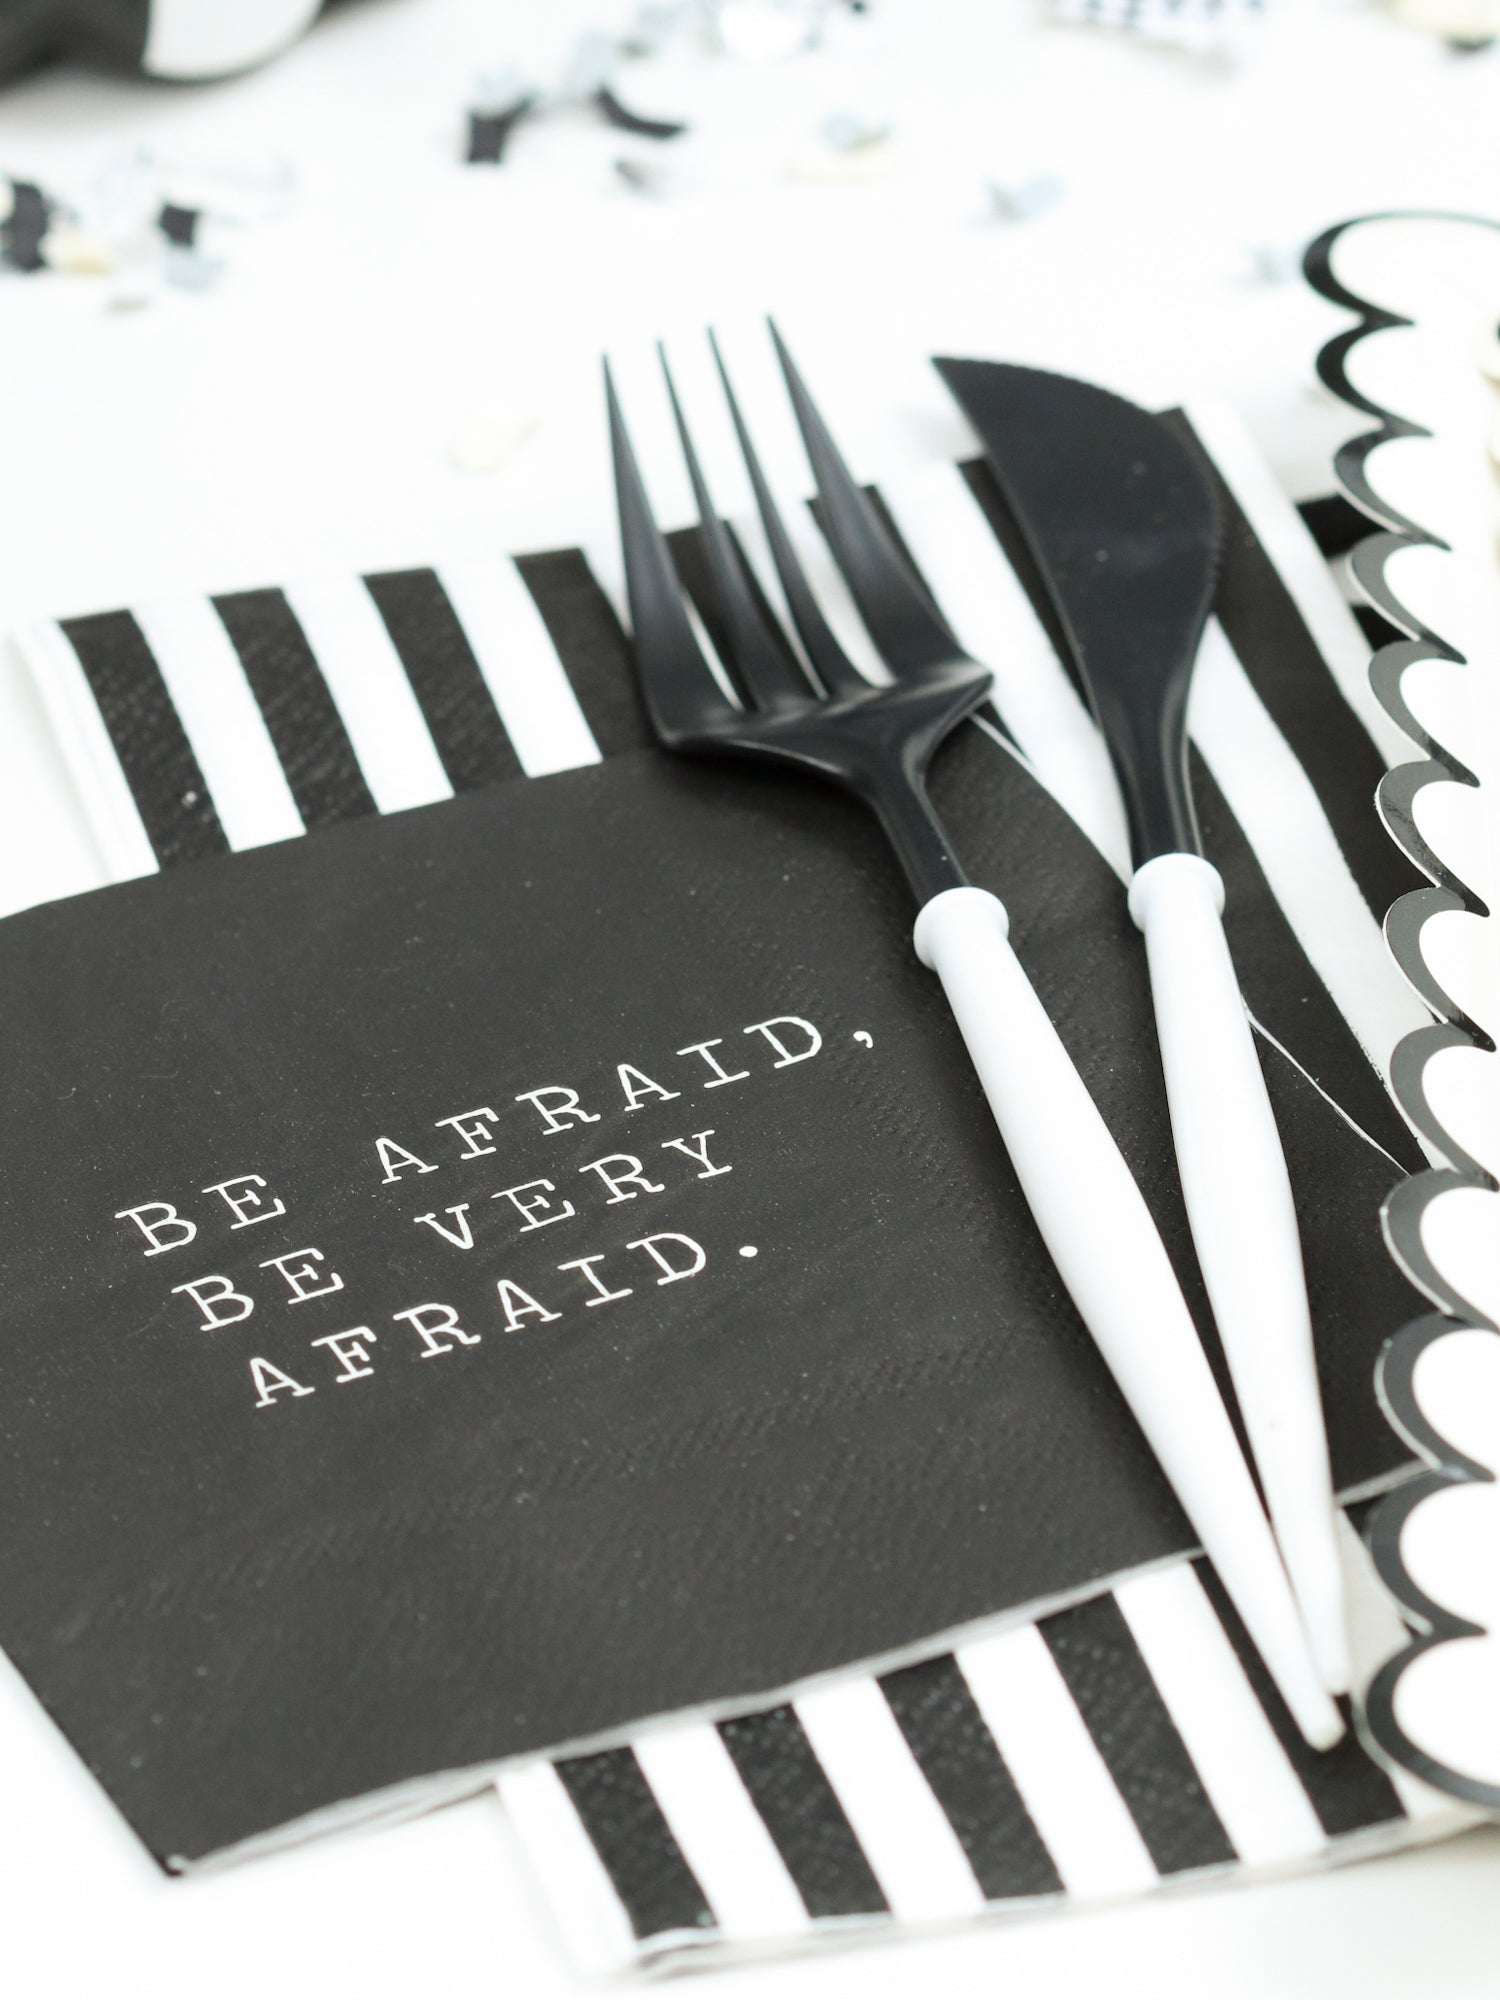 Be Afraid Wednesday Addams Napkin | The Party Darling